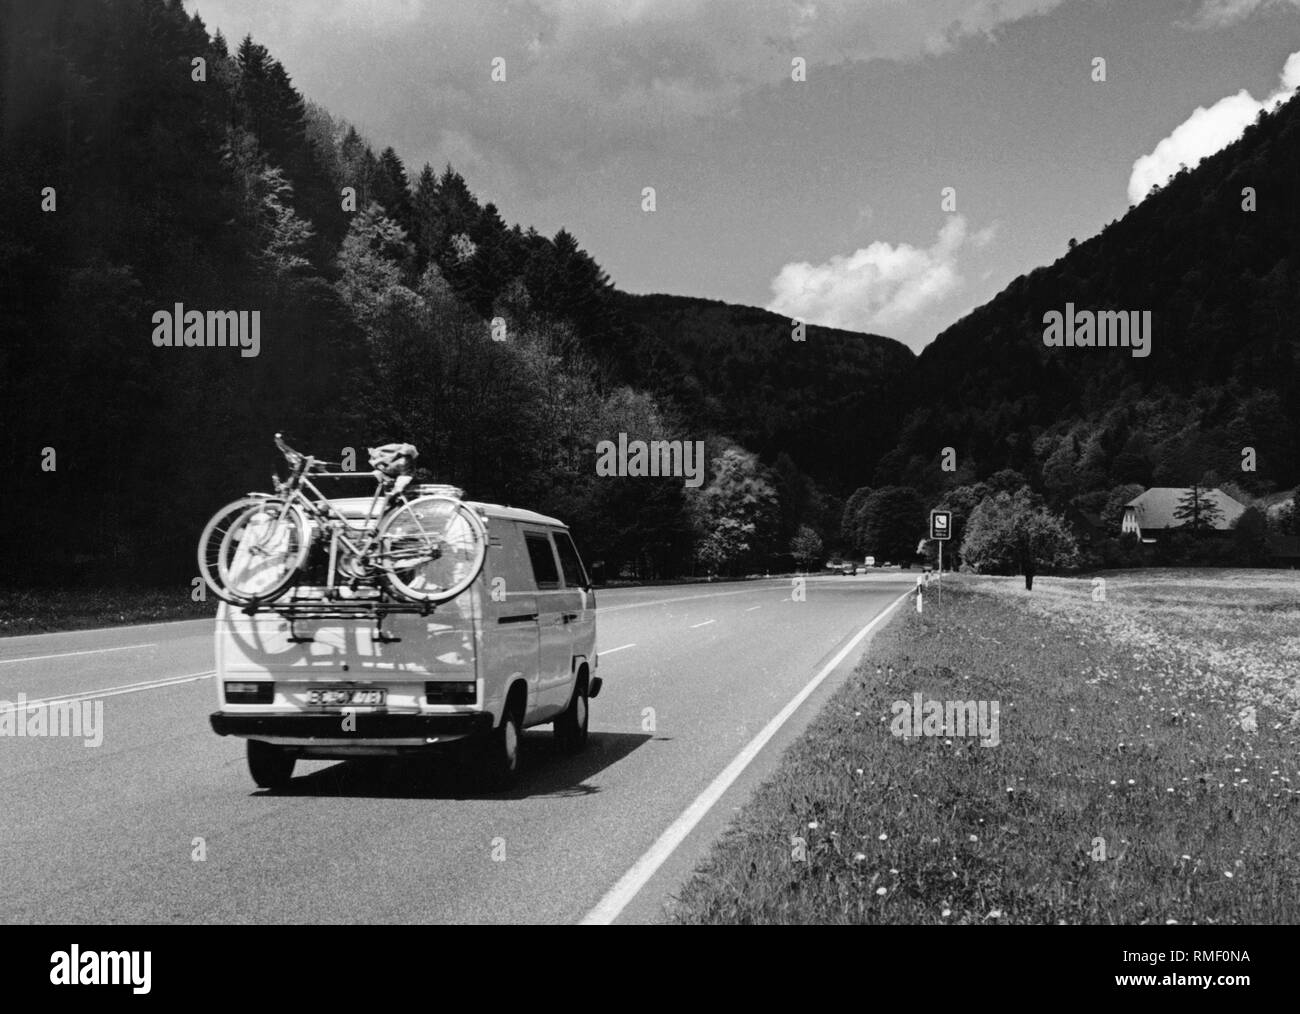 Volkswagen t3 Black and White Stock Photos & Images - Alamy